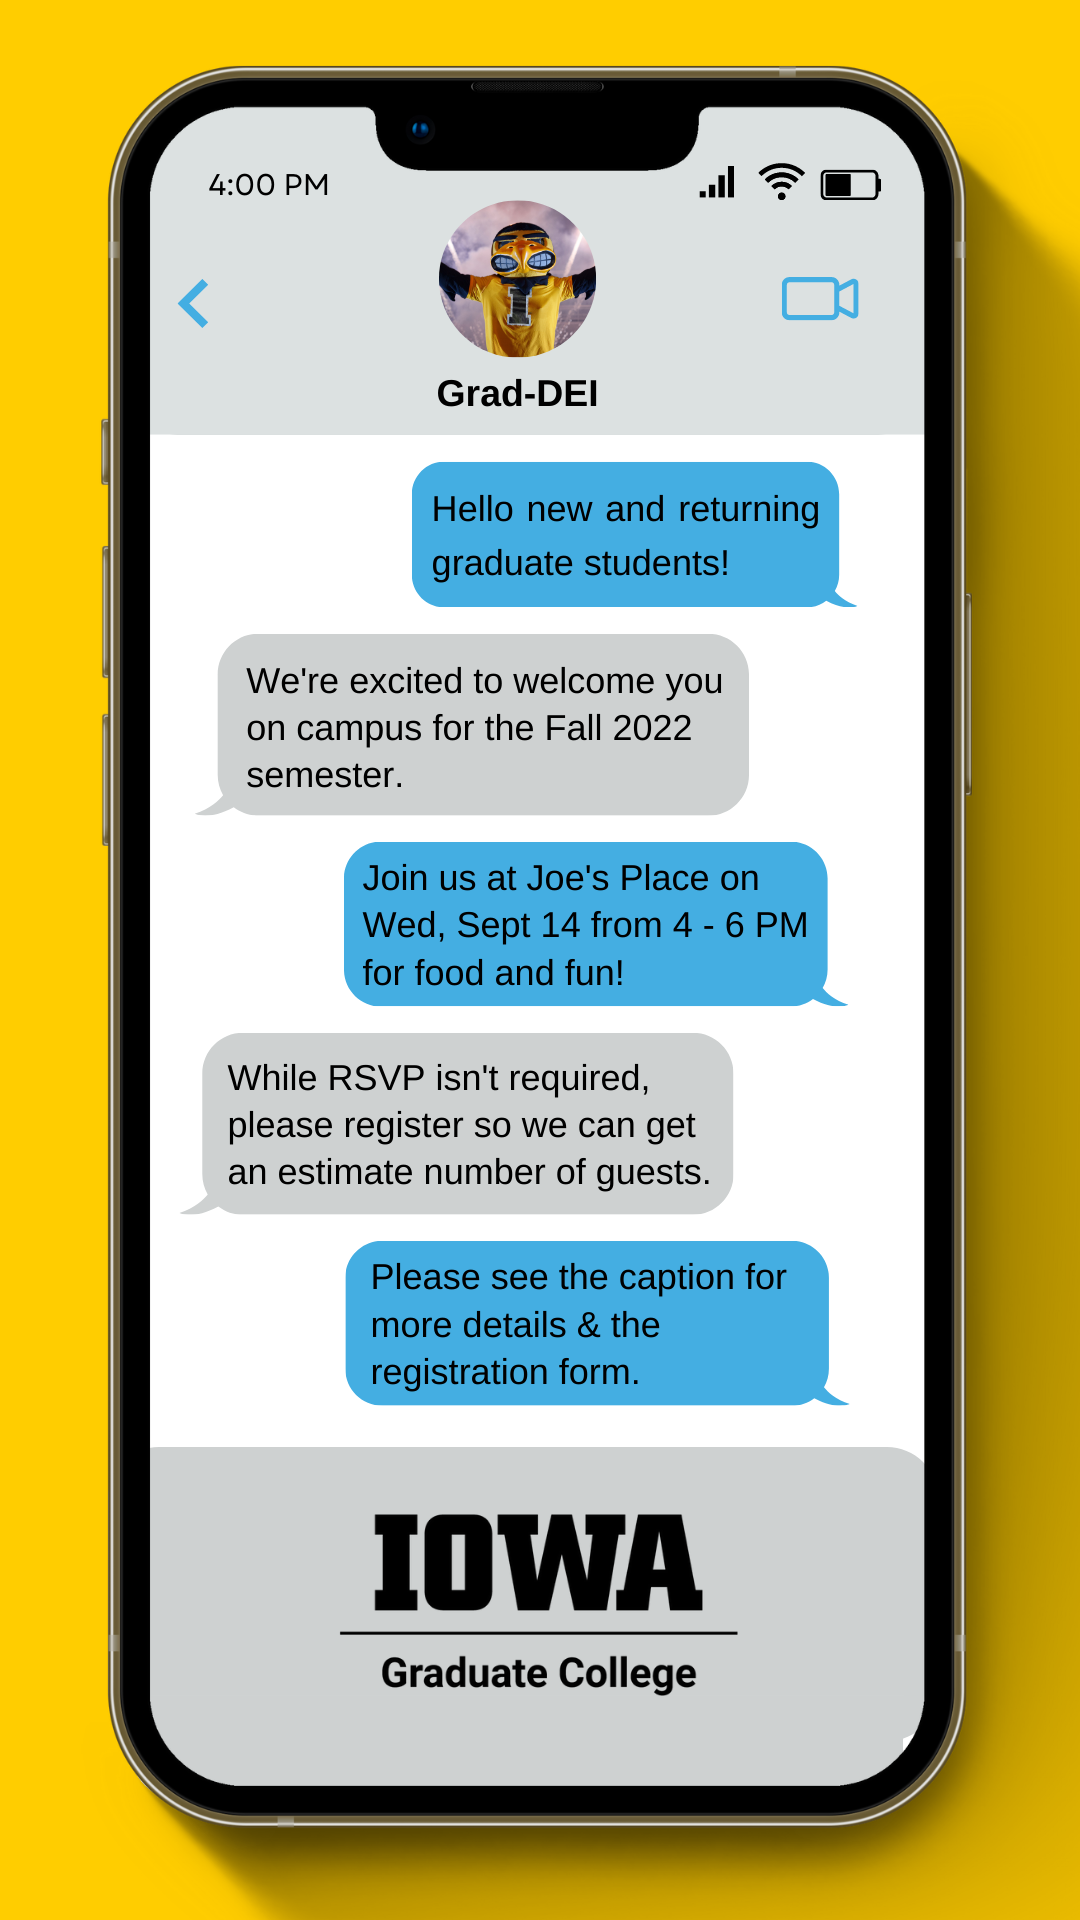 yellow background with image of imessage interface containing information about event (date & time: 9/14/22, 4 - 6 PM @ Joe's Place Iowa City)